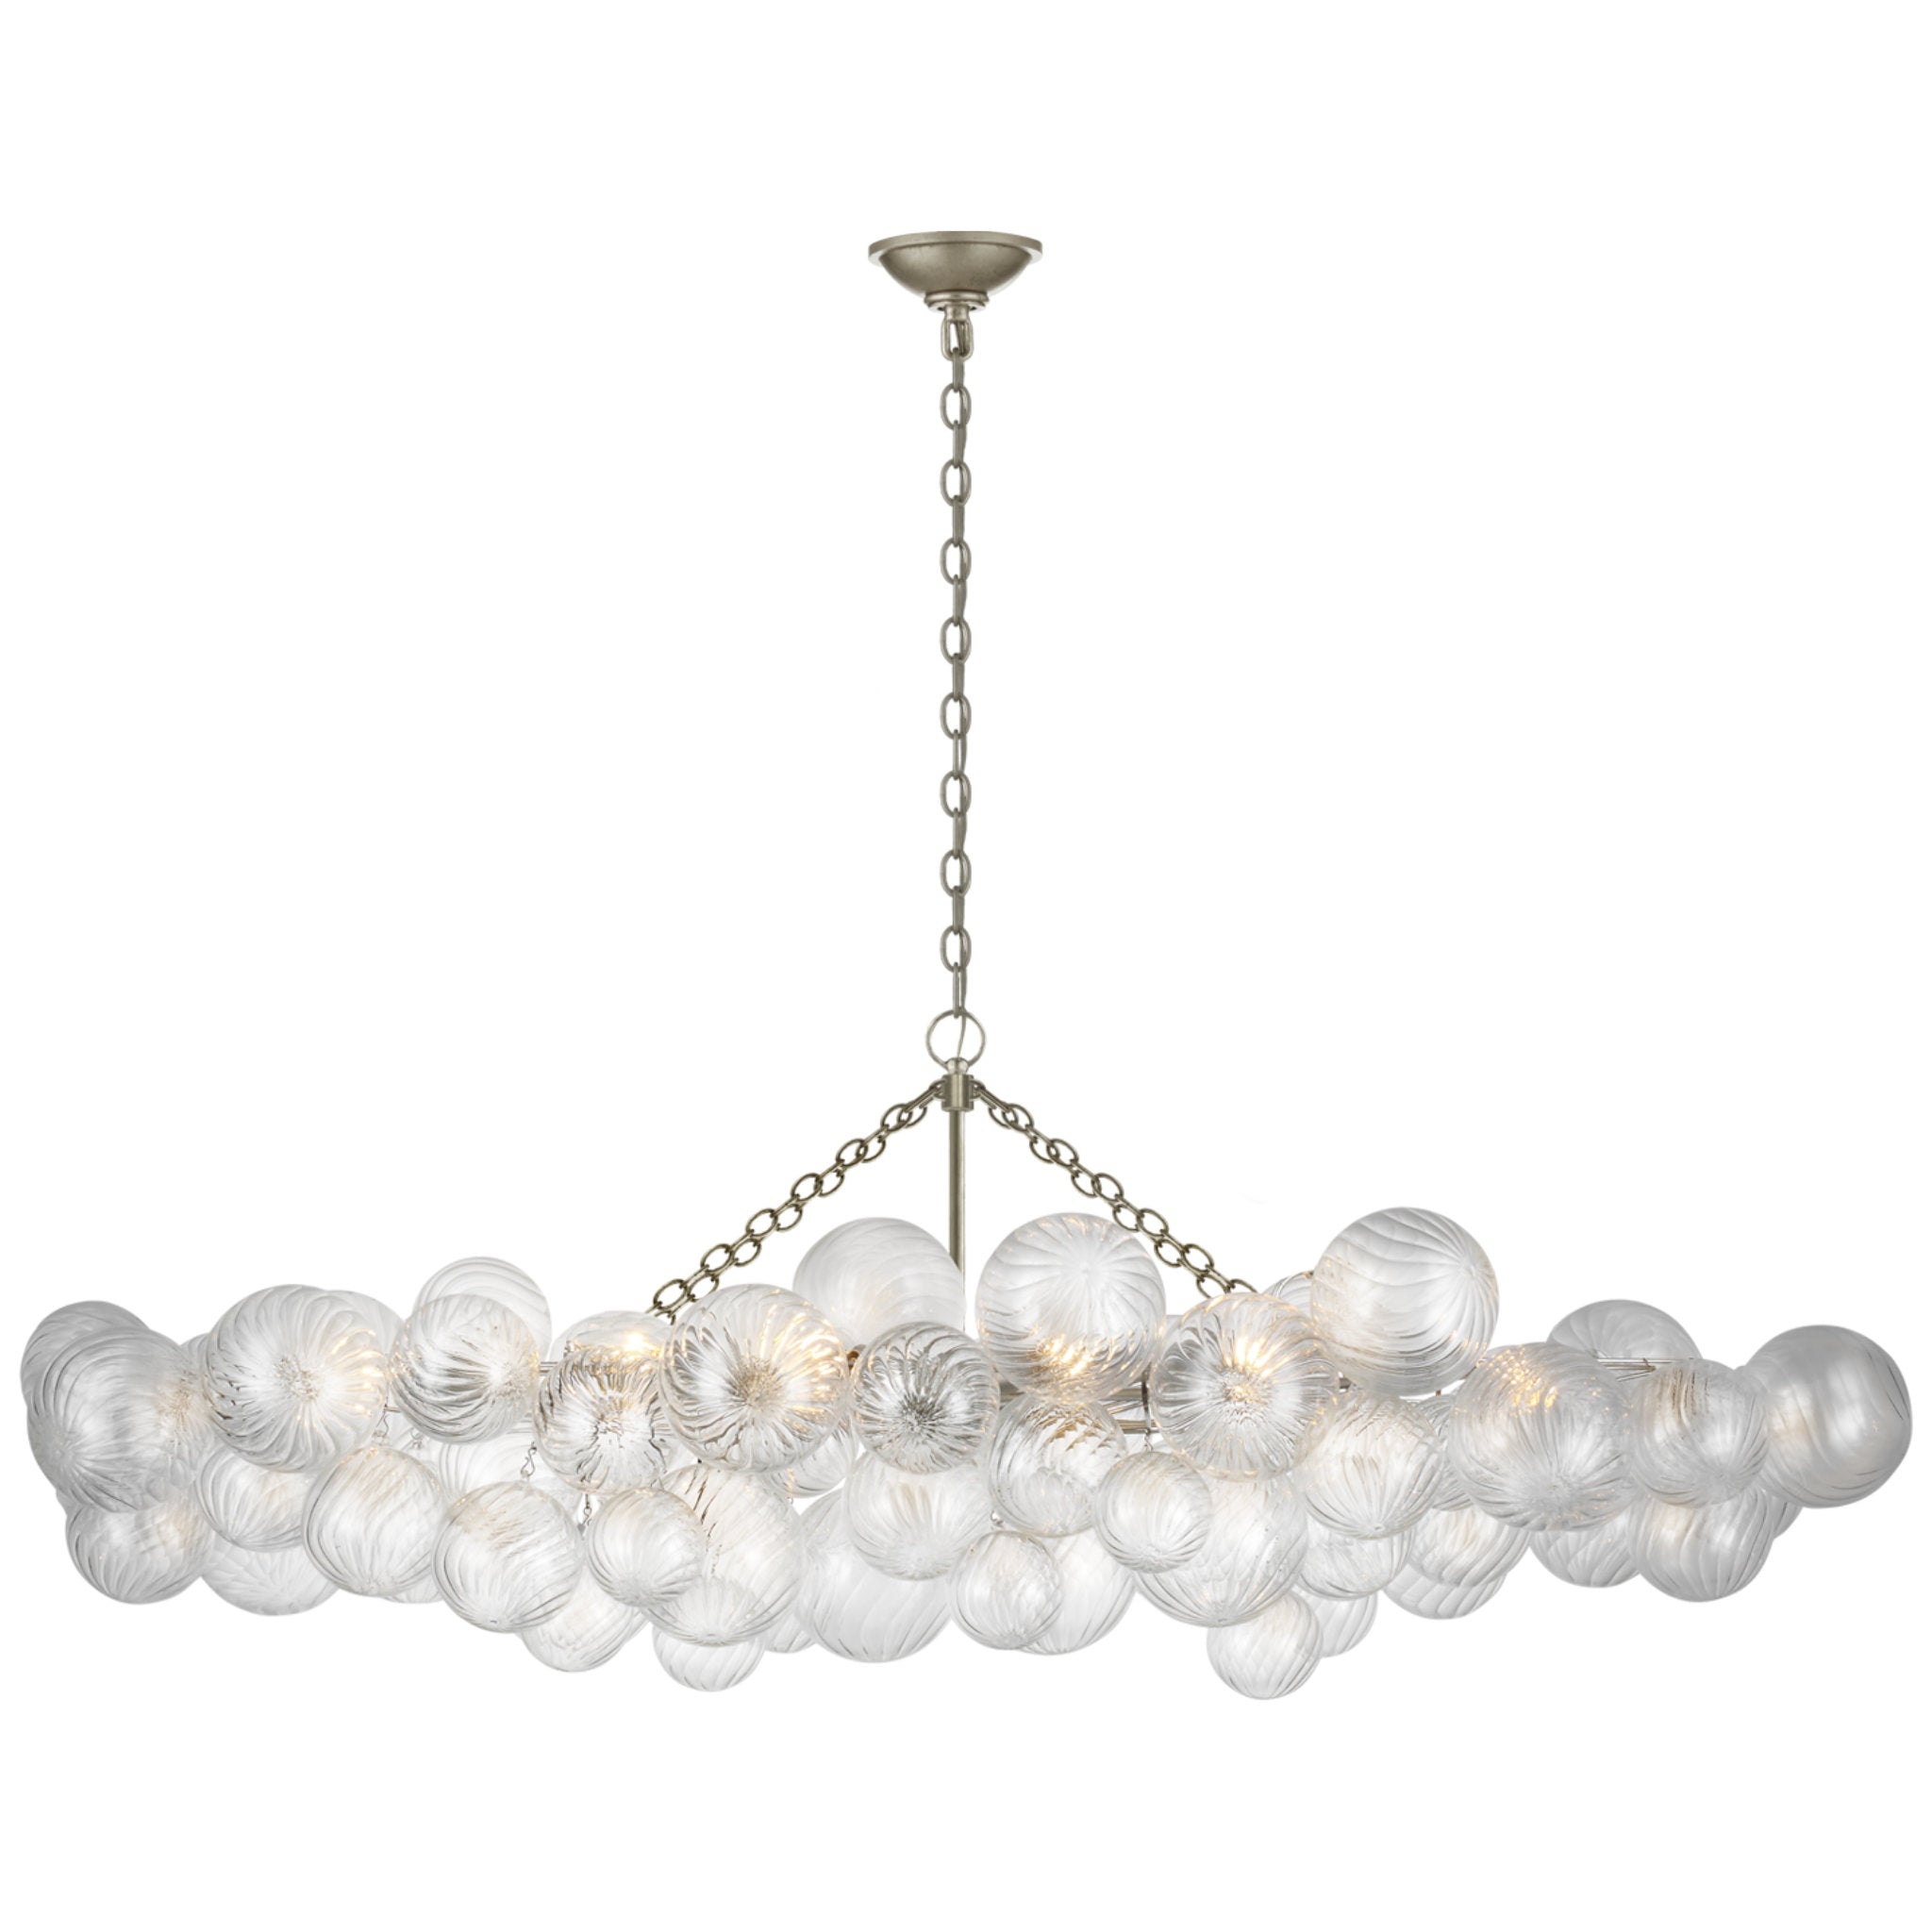 Julie Neill Talia Large Linear Chandelier in Burnished Silver Leaf with Clear Swirled Glass